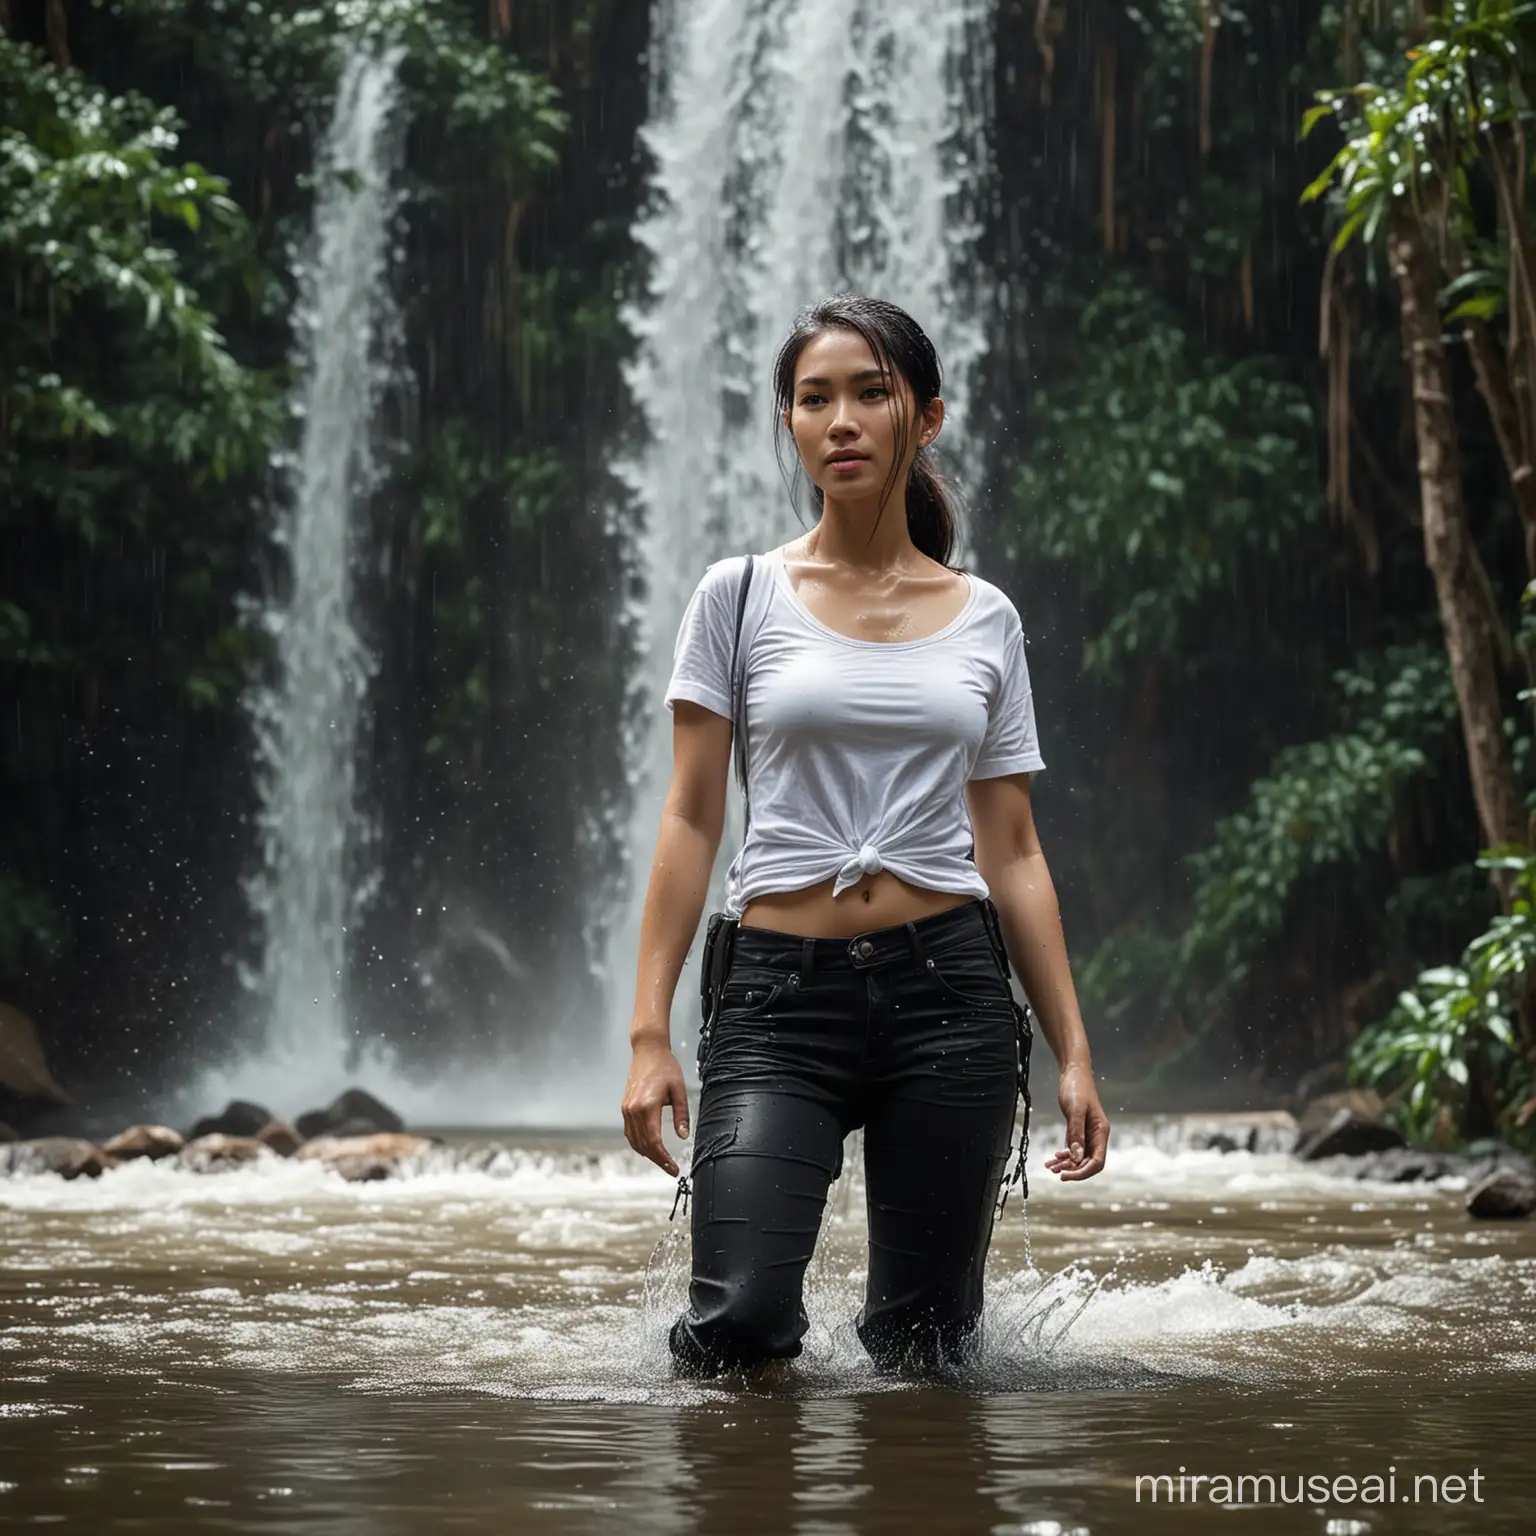 a beautiful Thai woman, who is a member of a special forces unit. He was seen in a forest environment wearing a white t-shirt with a kebaya submerged in water and black short jeans. Waterfalls provide the backdrop as he maneuvers through the wilderness with tactical skill and precision. Shadows that emphasize tension and intensity, heavy rain, wet clothes effects, and water splash effects are clearly visible. Realistic full HD....